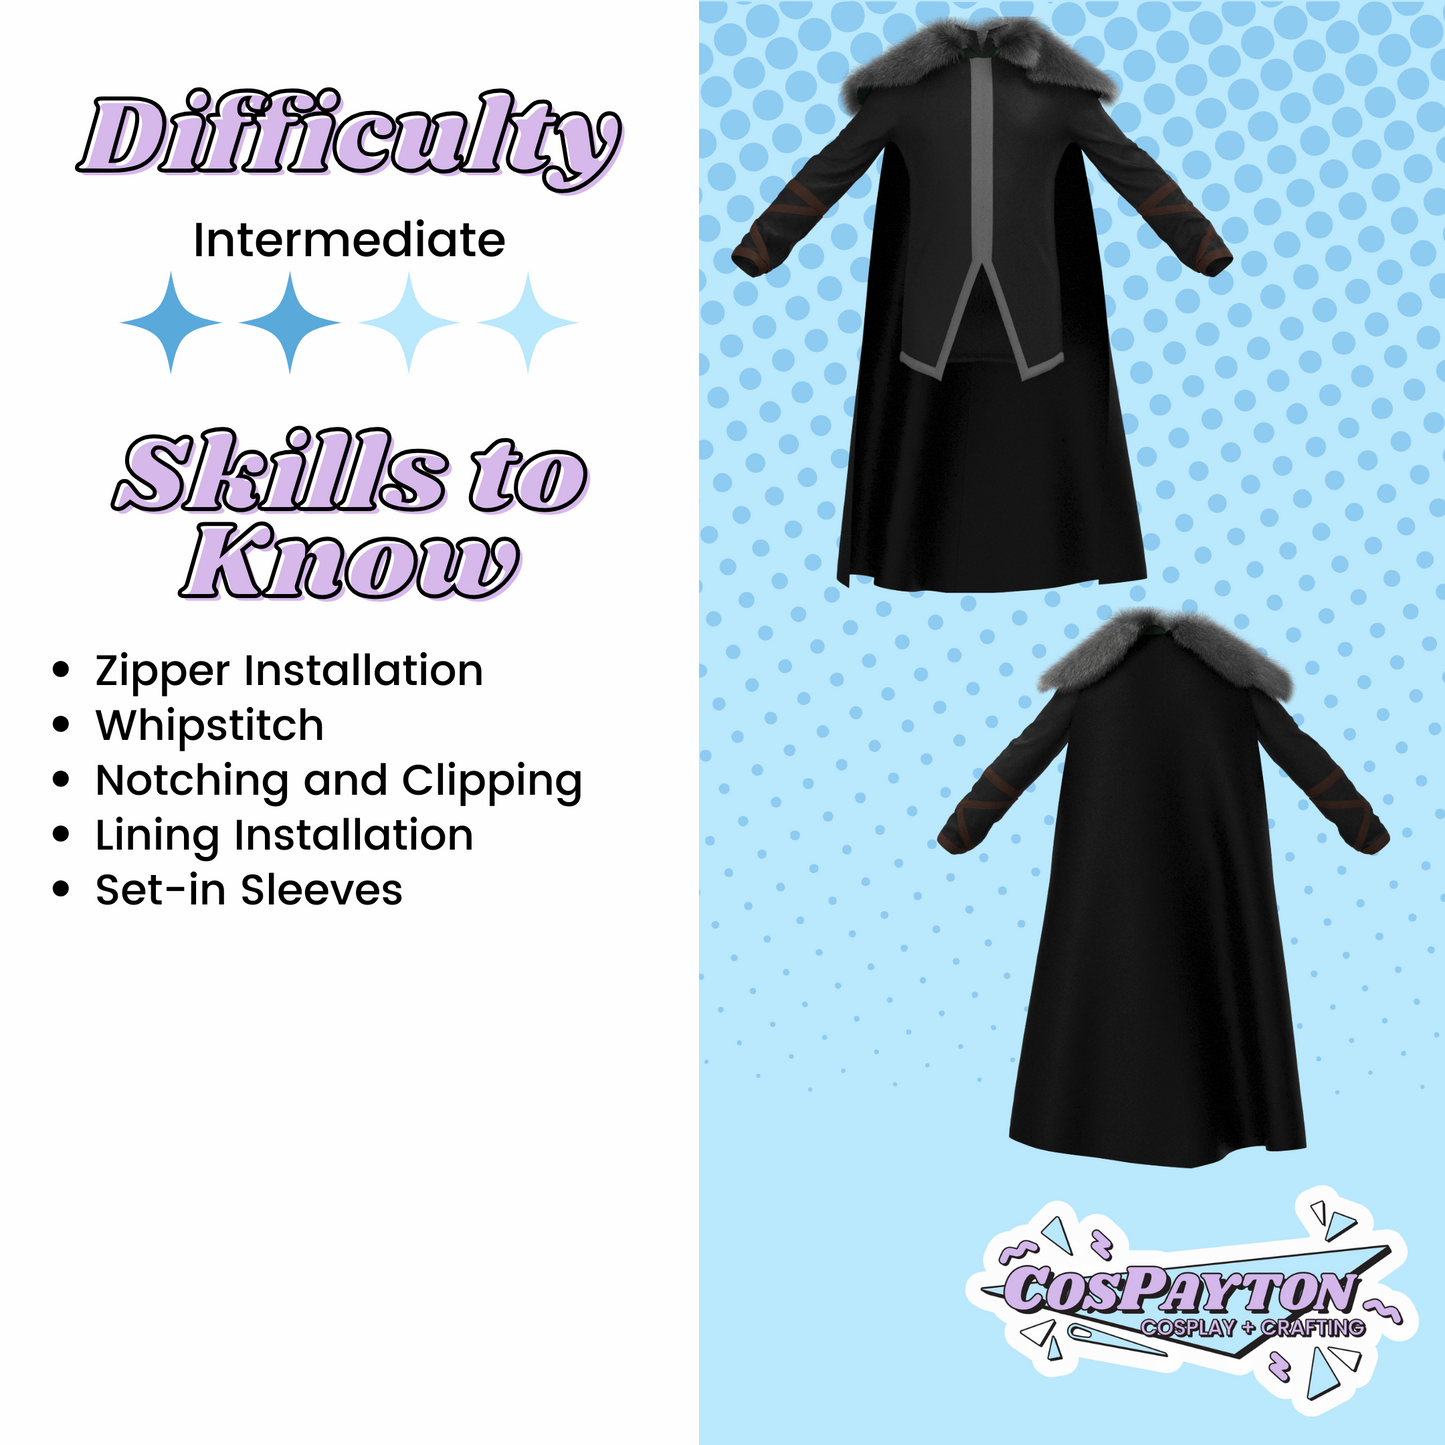 Vax'ildan Coat and Cape PDF Cosplay Pattern | Critical Role Inspired Printable Costume Pattern